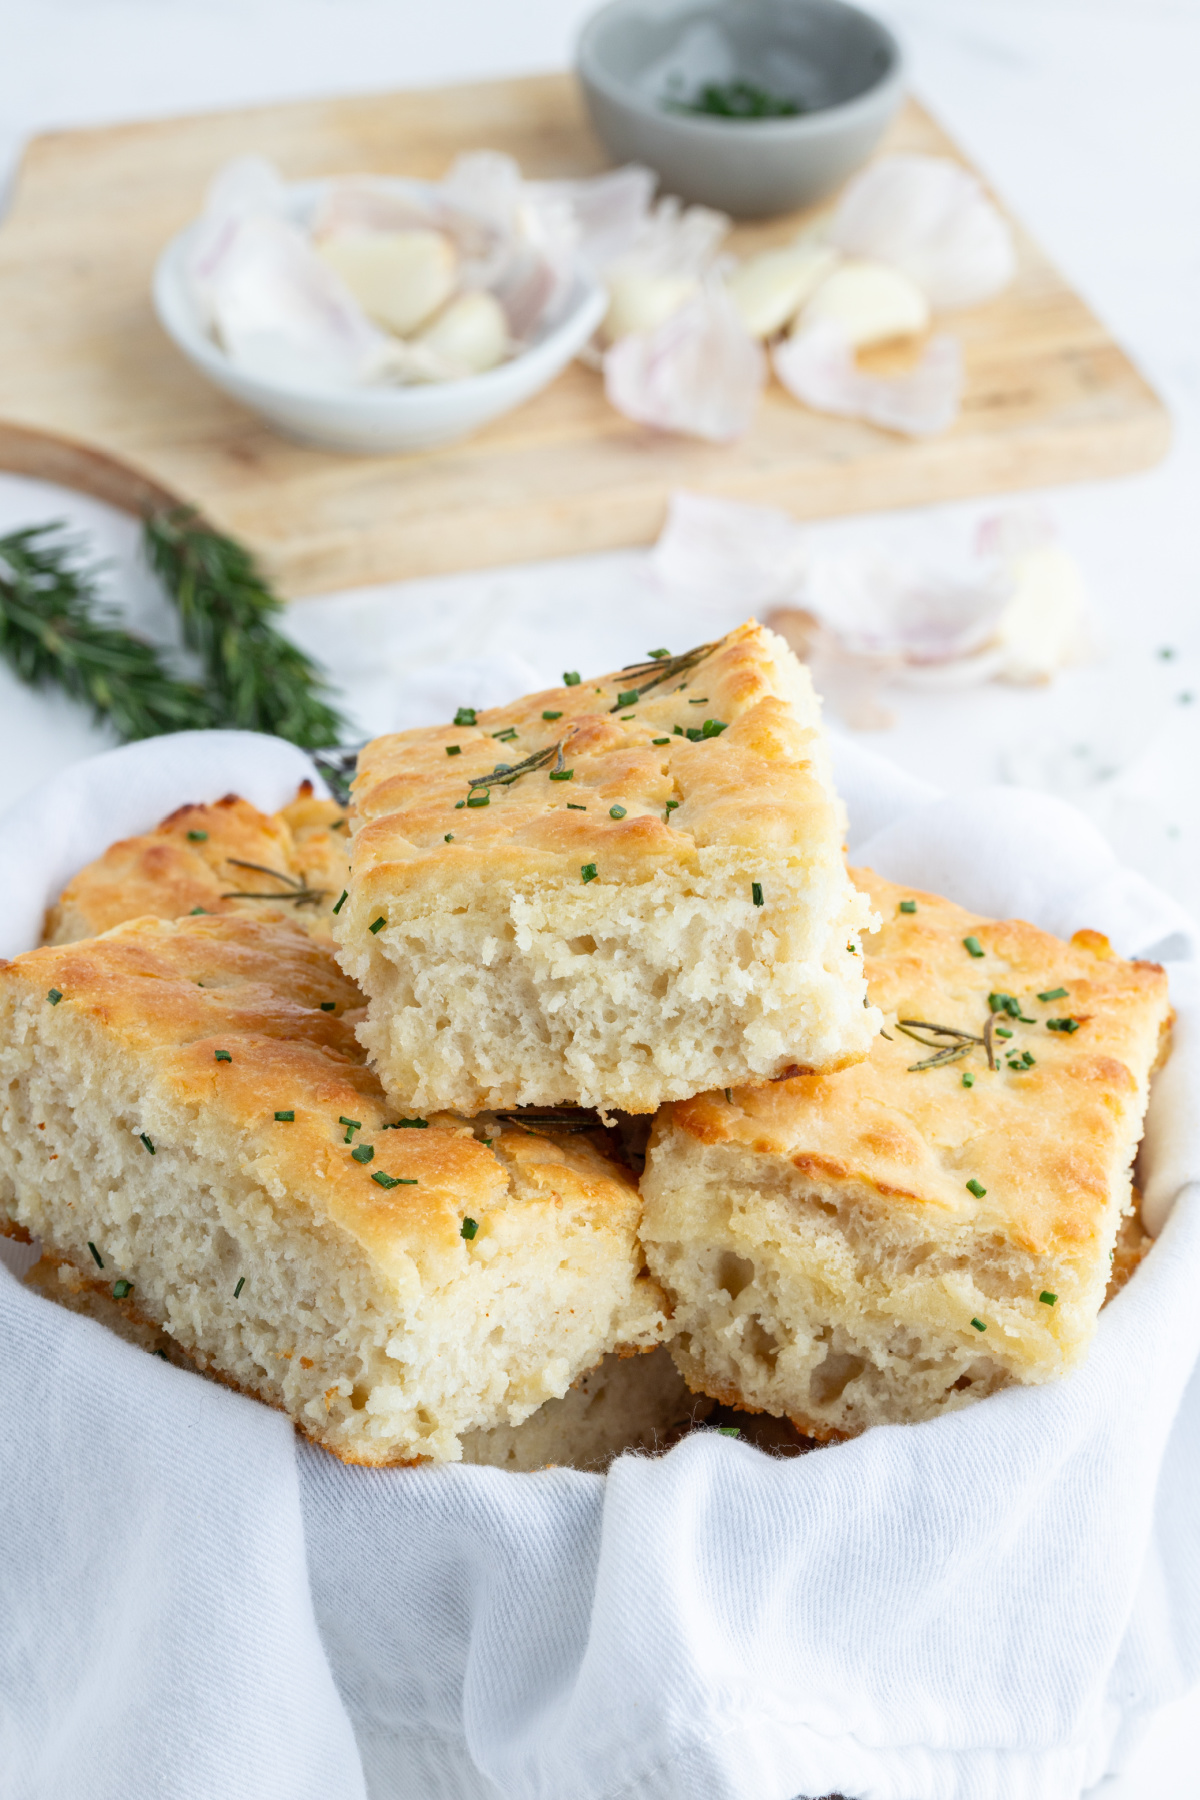 rosemary garlic butter bath biscuits in serving dish lined with cloth